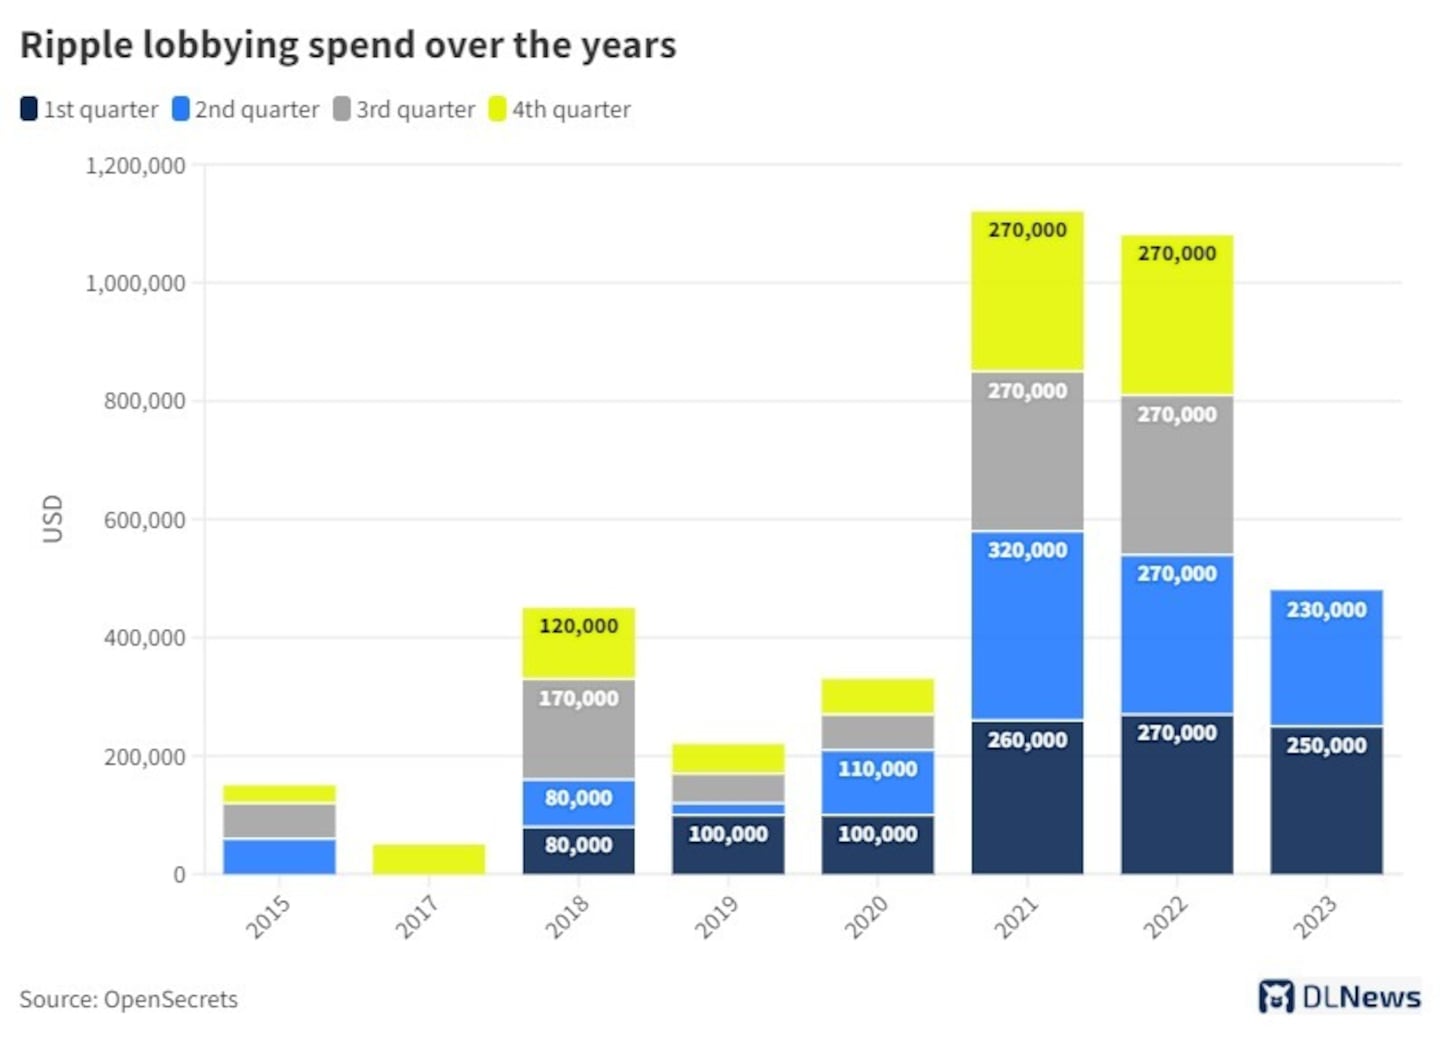 Ripple lobbying spend over the years